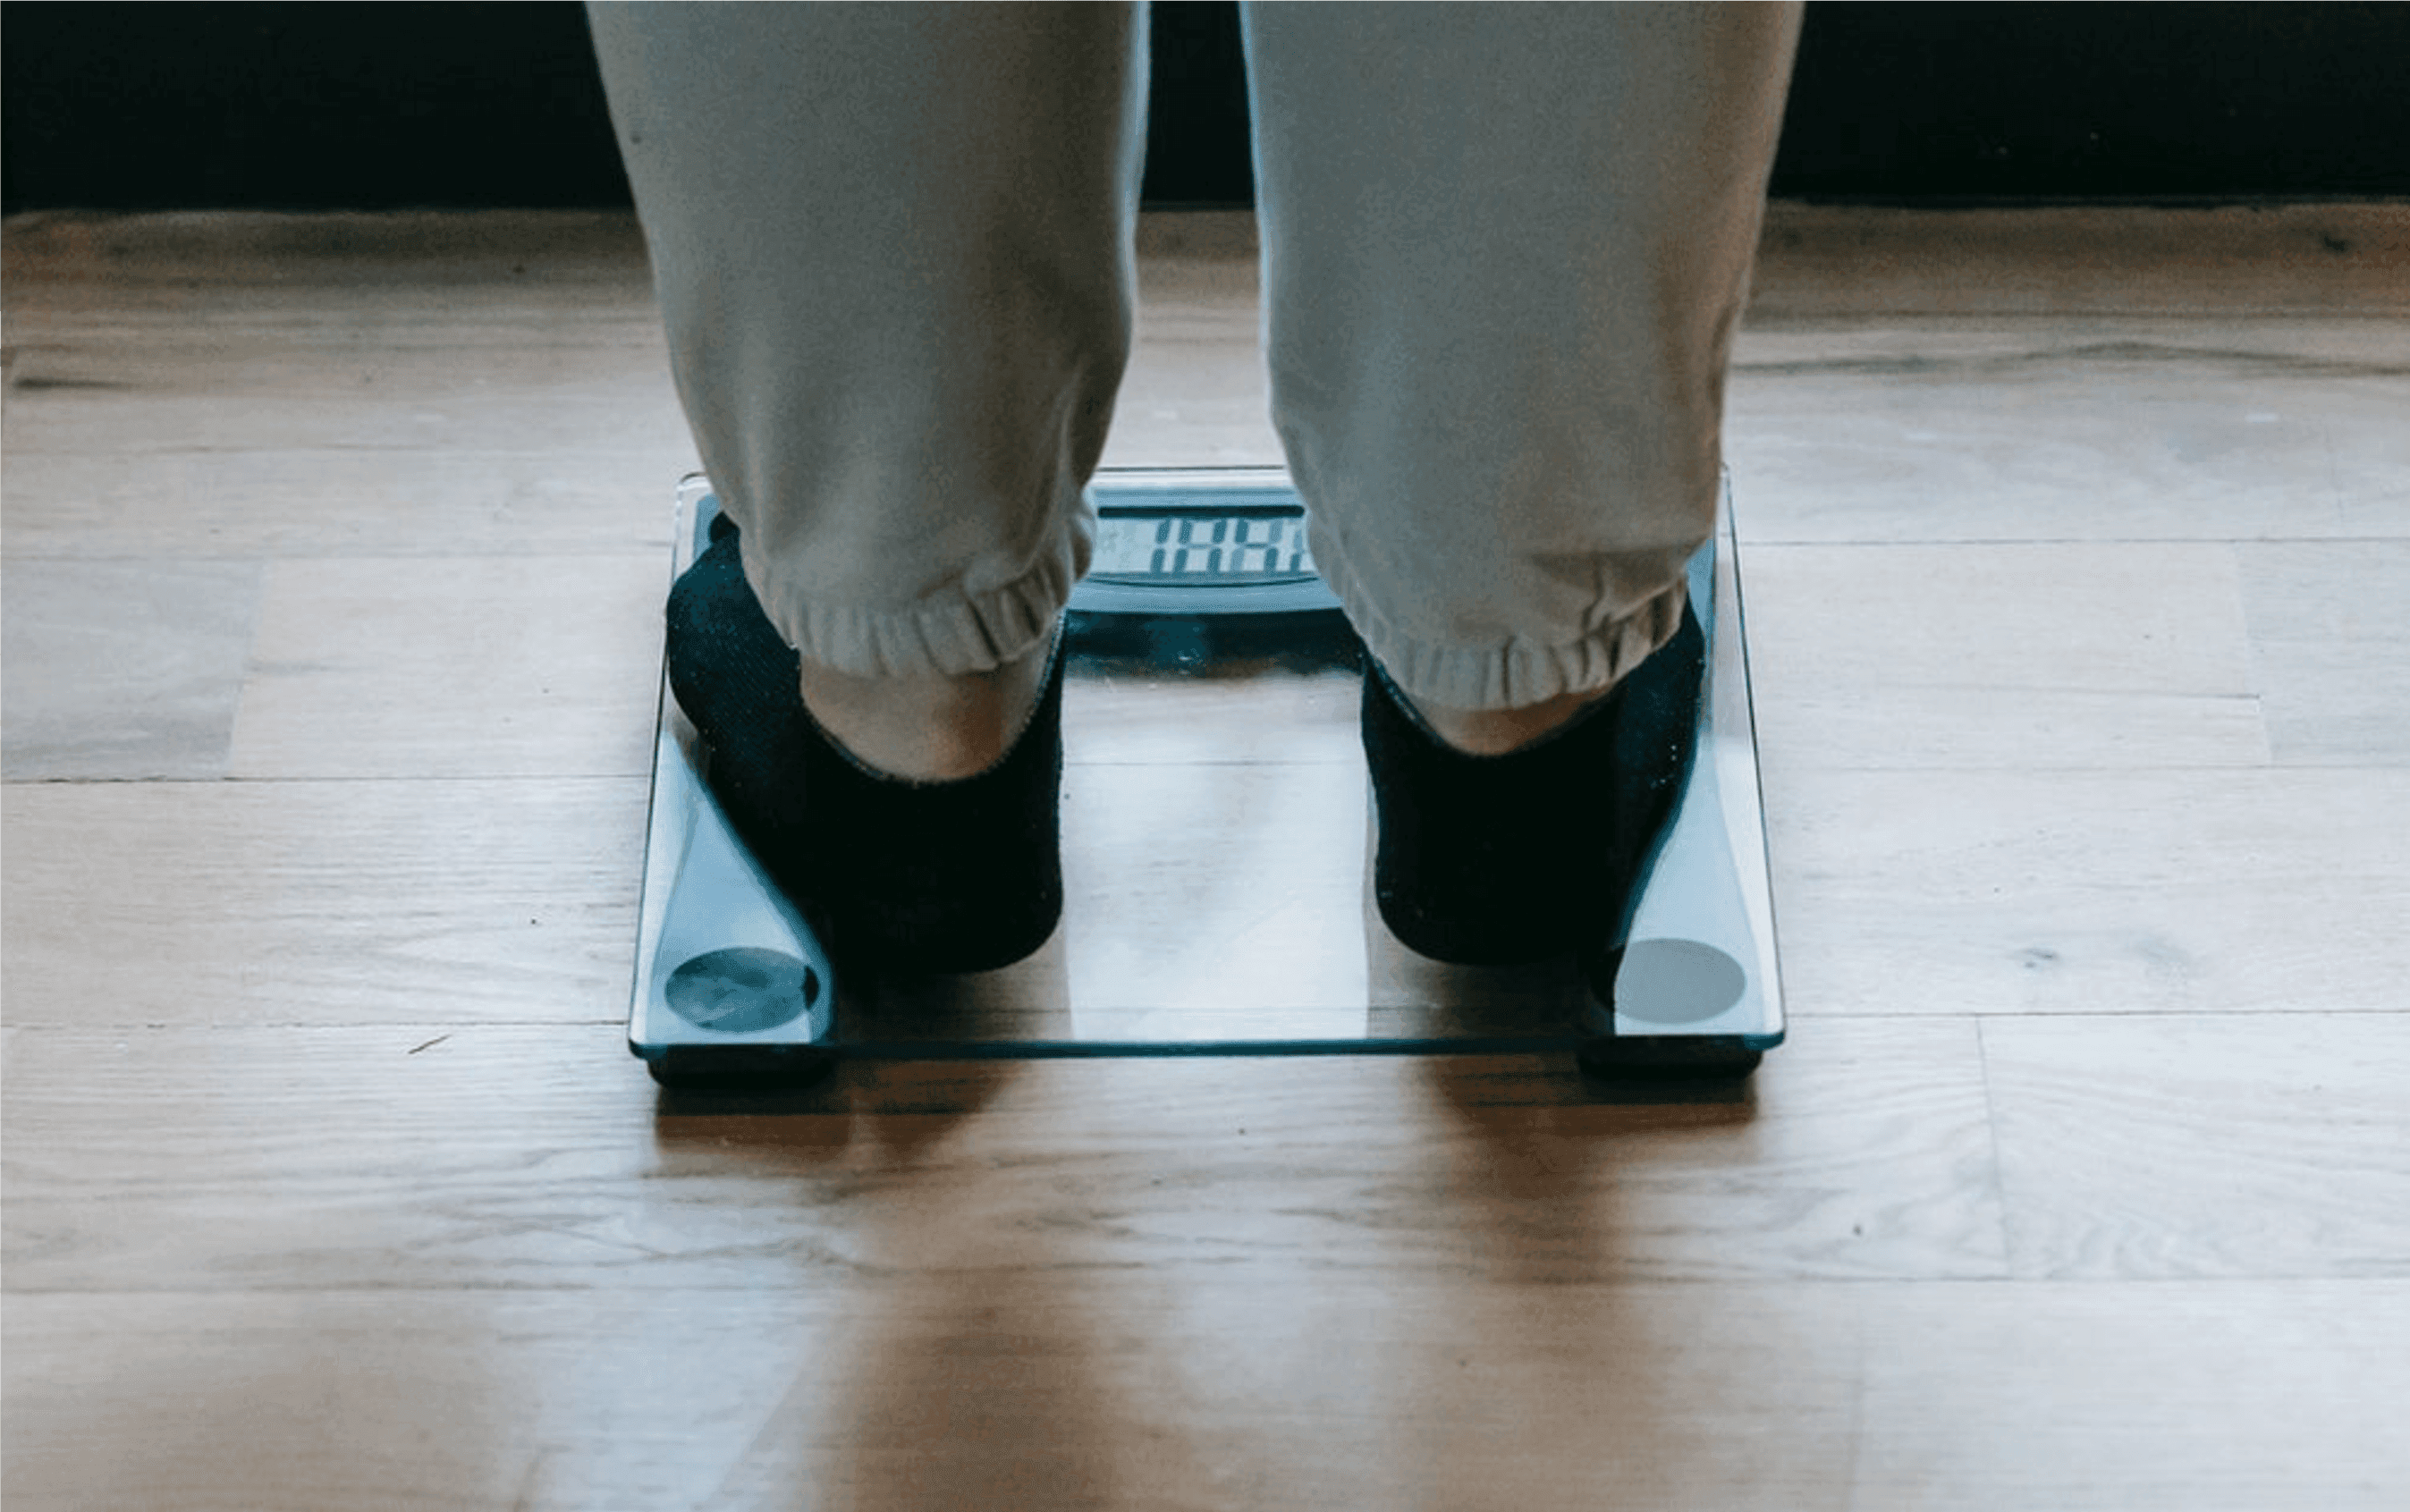 can us arlines weigh passengers?